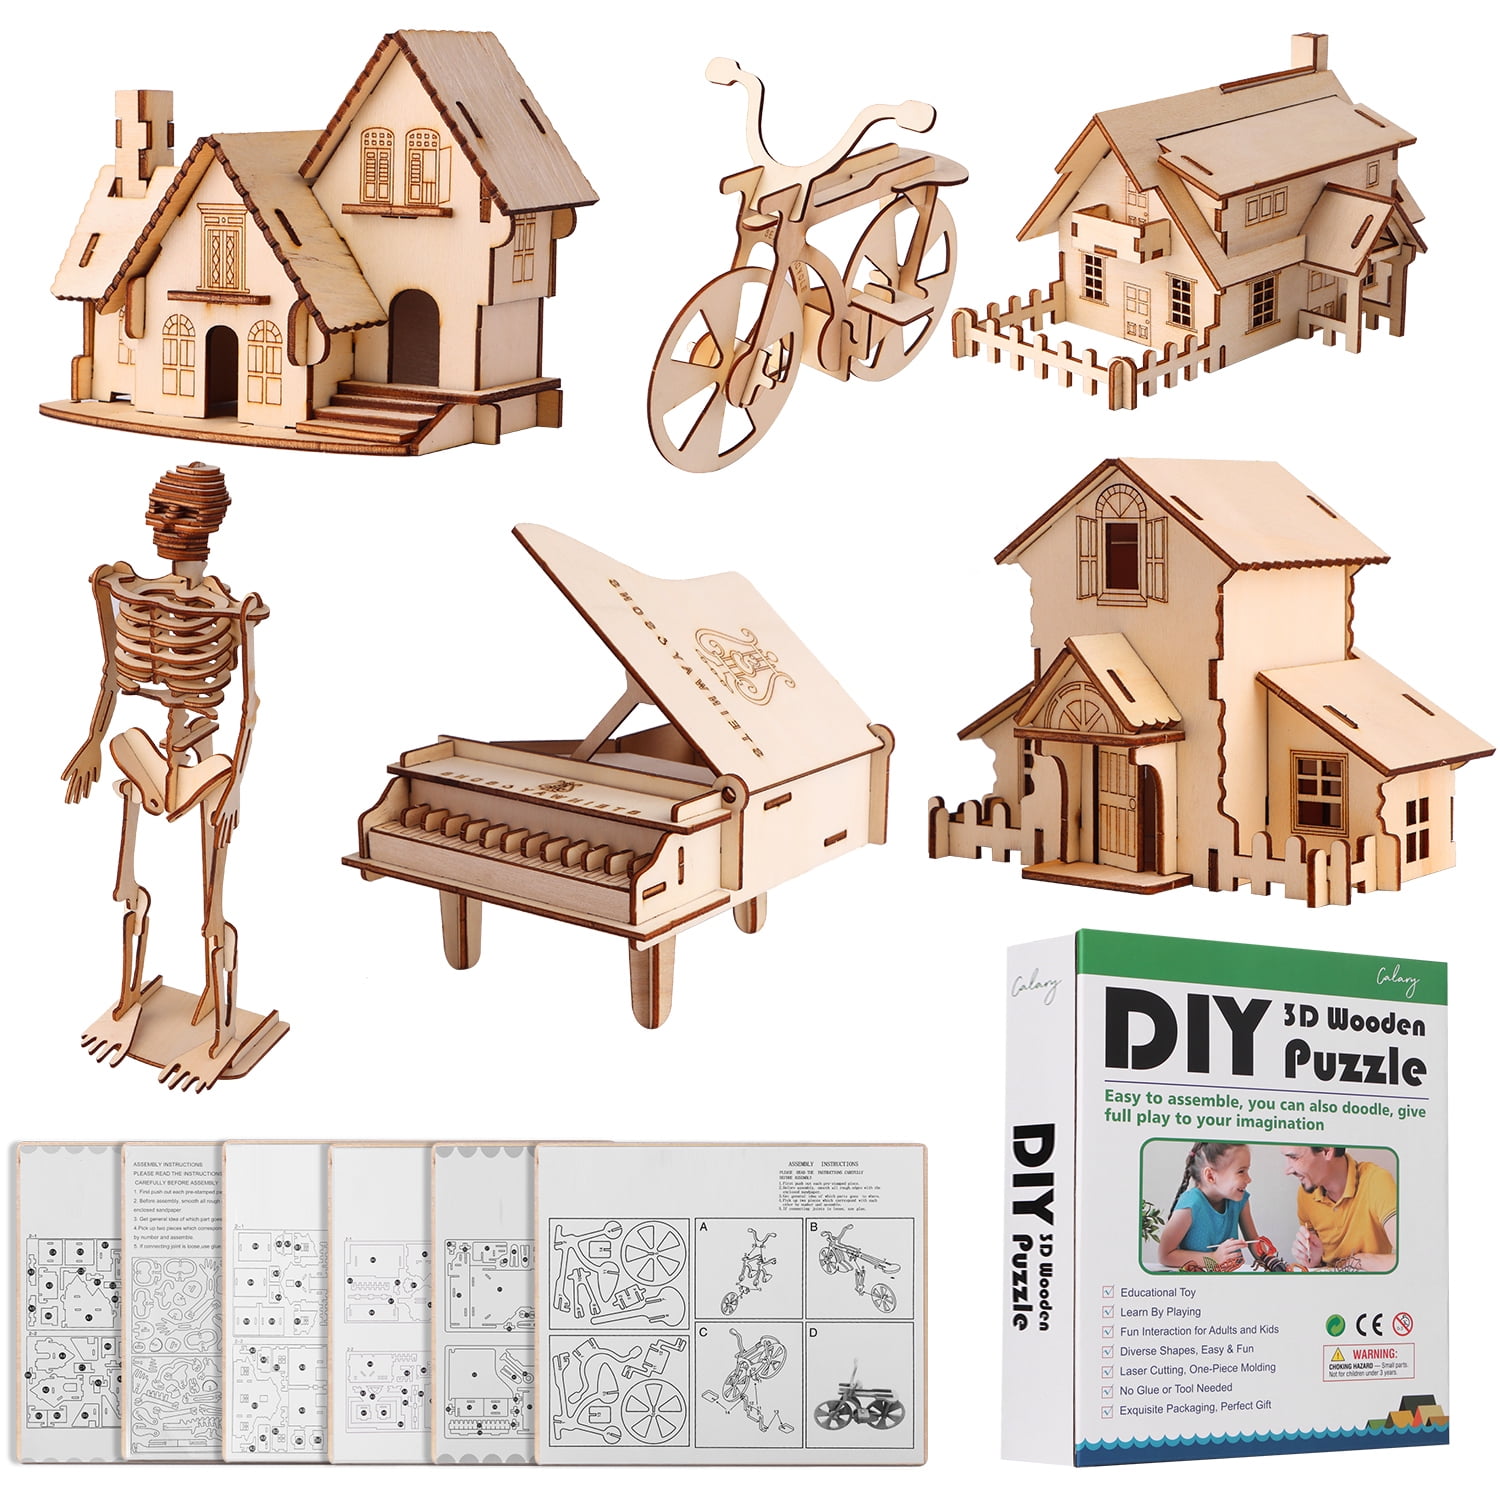 Details about   1X Animal Puzzle Woodcraft Construction Kit Educational Toys Wooden Model Kit 3D 